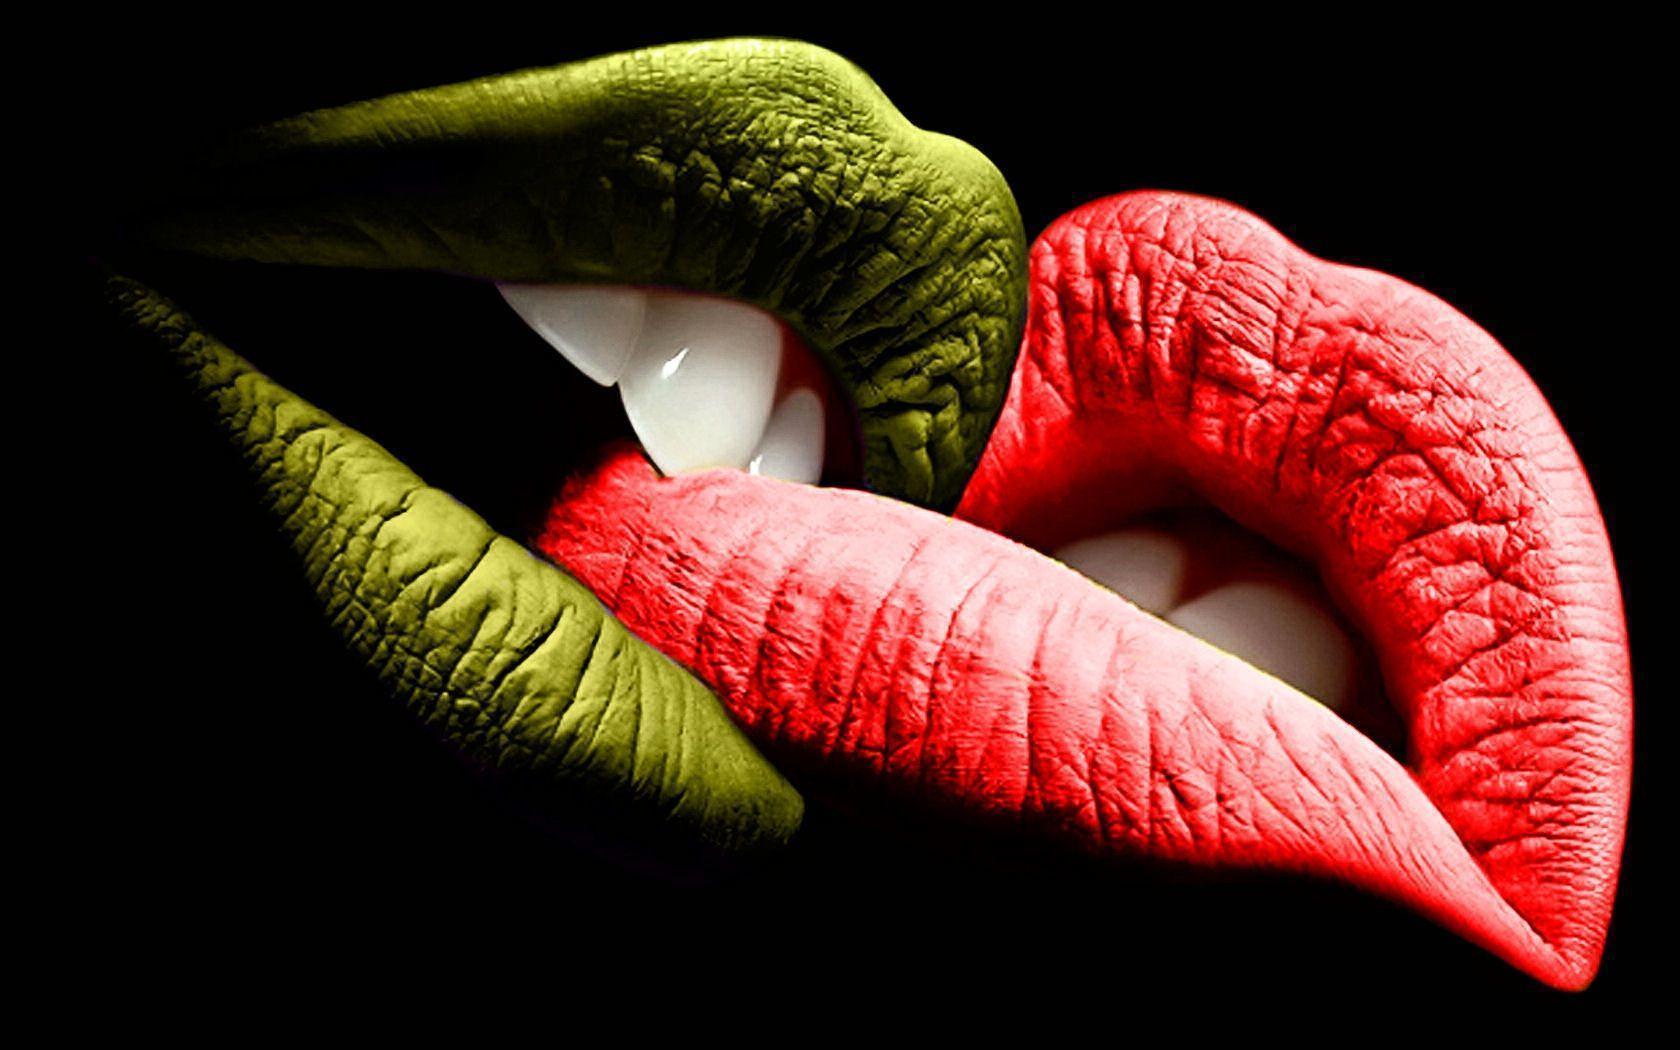 Wallpapers Of Lips Kiss - Wallpaper Cave